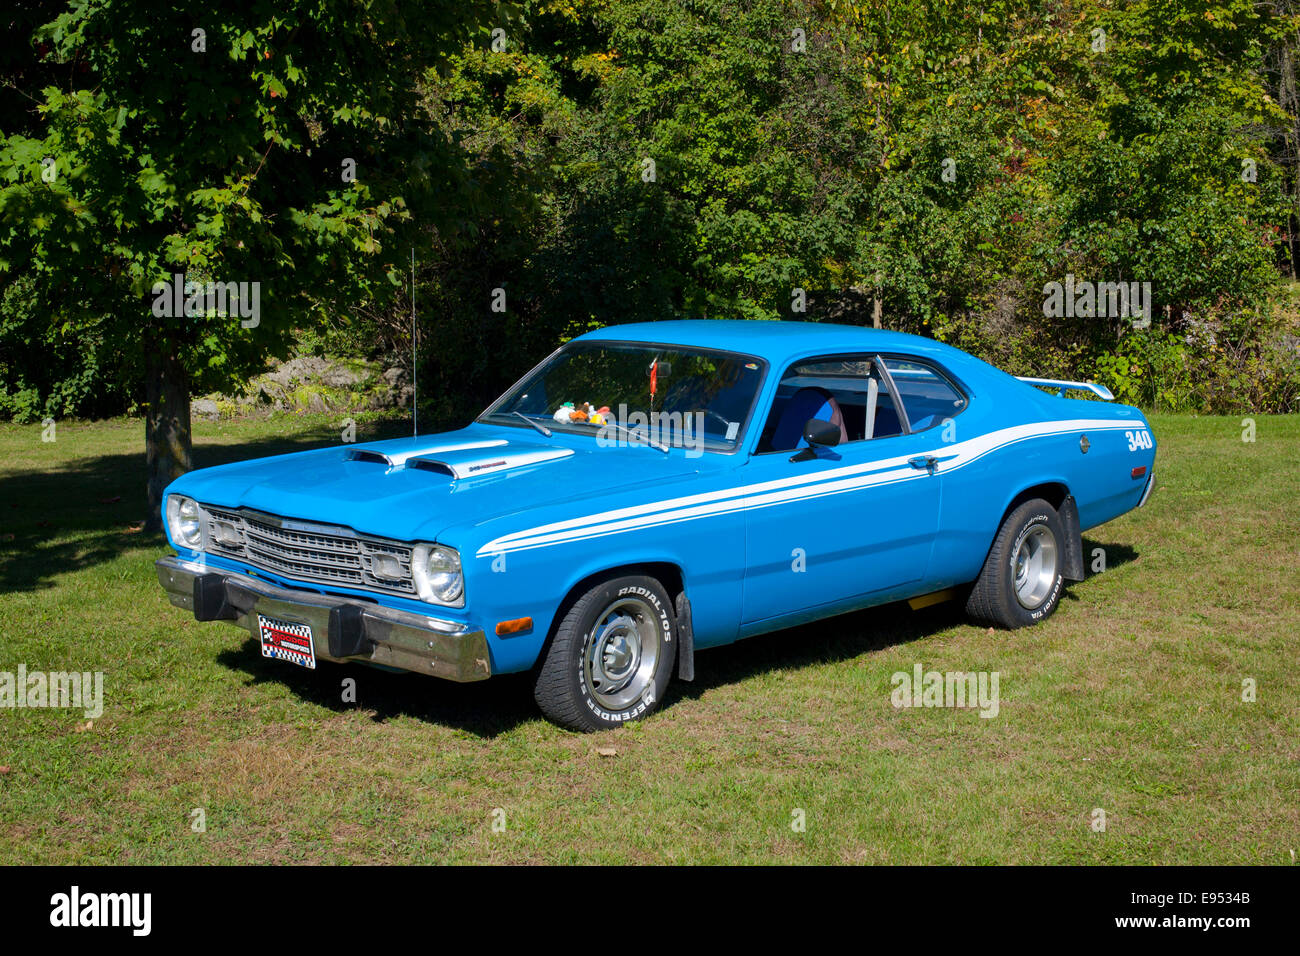 Plymouth Duster 340 from 1973, Roxton Pond, Quebec, Canada Stock Photo